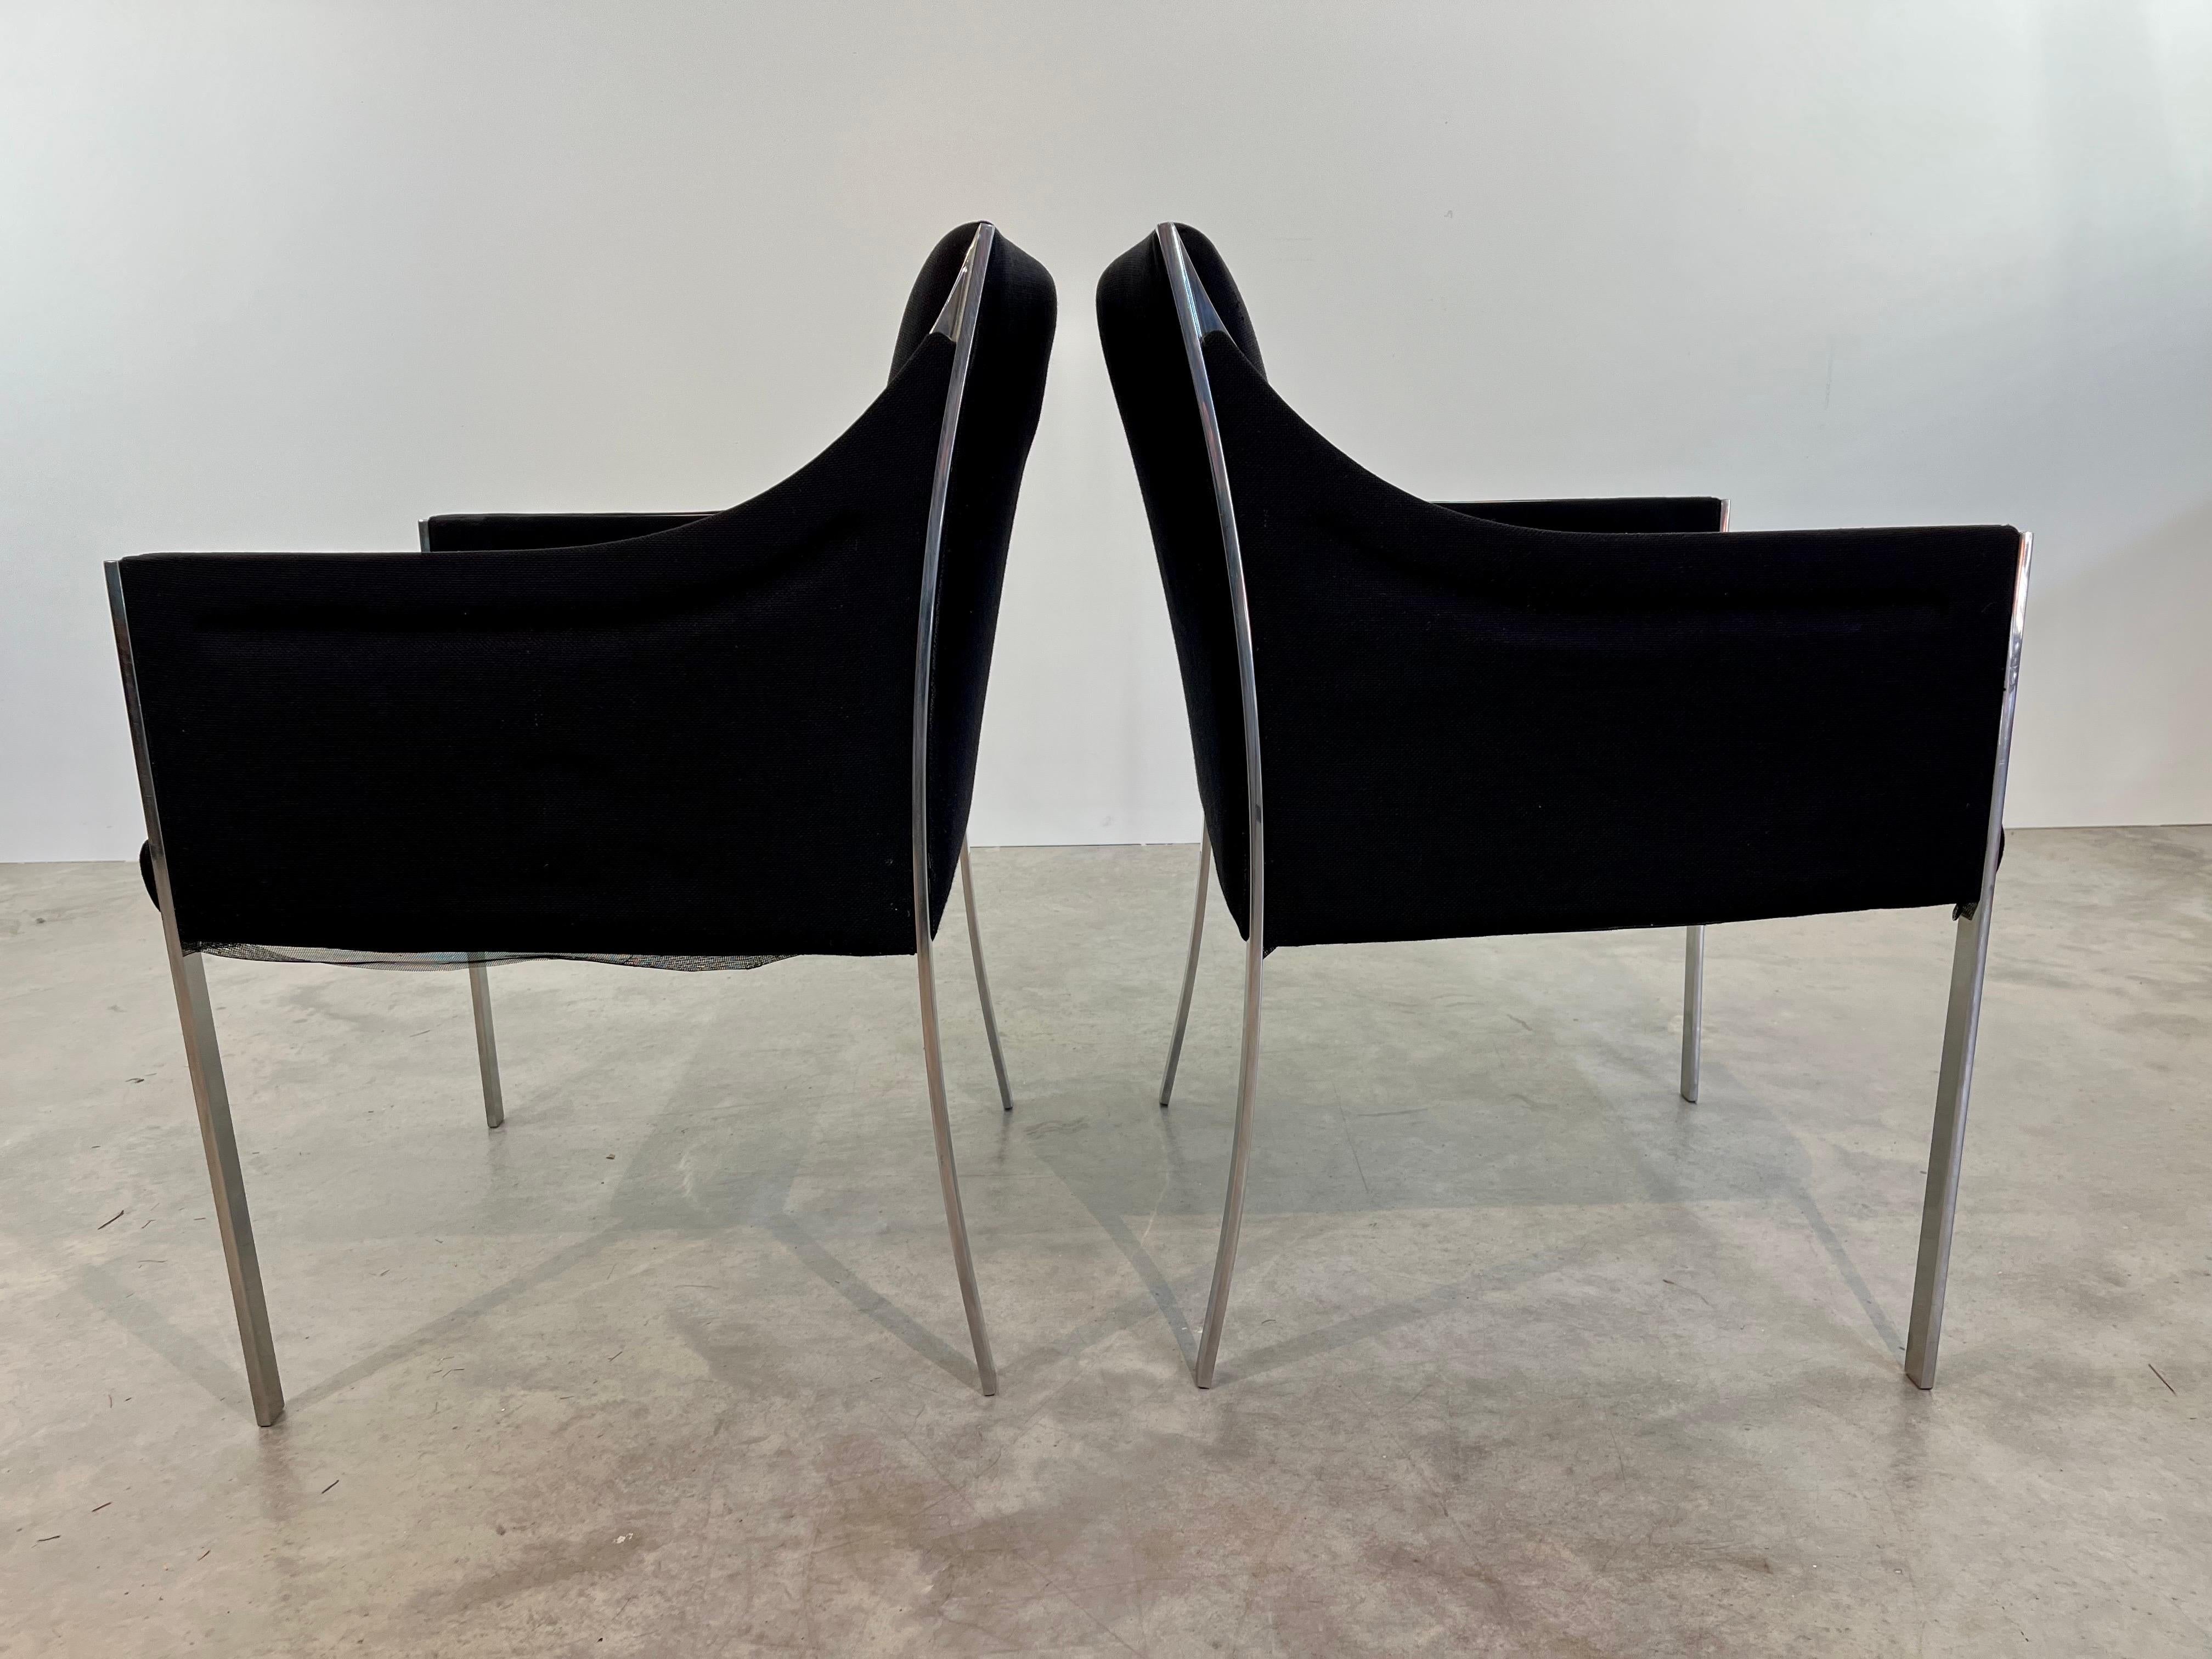 American Scarce Pair of Jens Risom Sculptural Chromed Steel Lounge Chairs For Sale